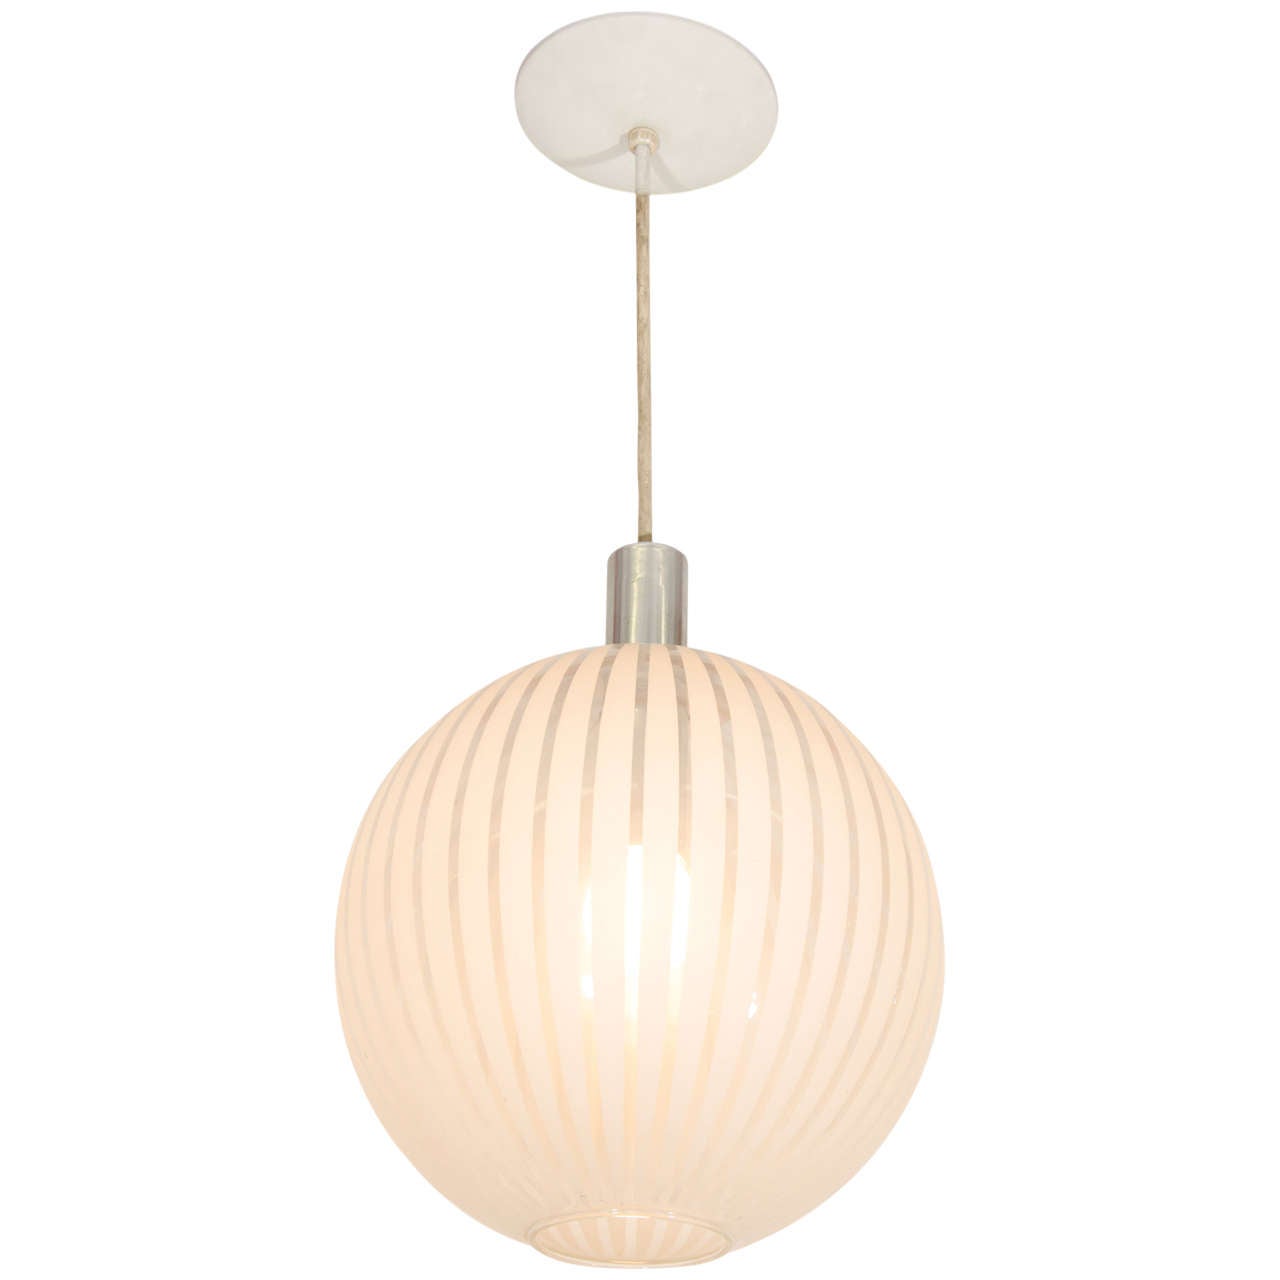 An Italian Midcentury Clear Glass Globe Pendant with White Stripes For Sale